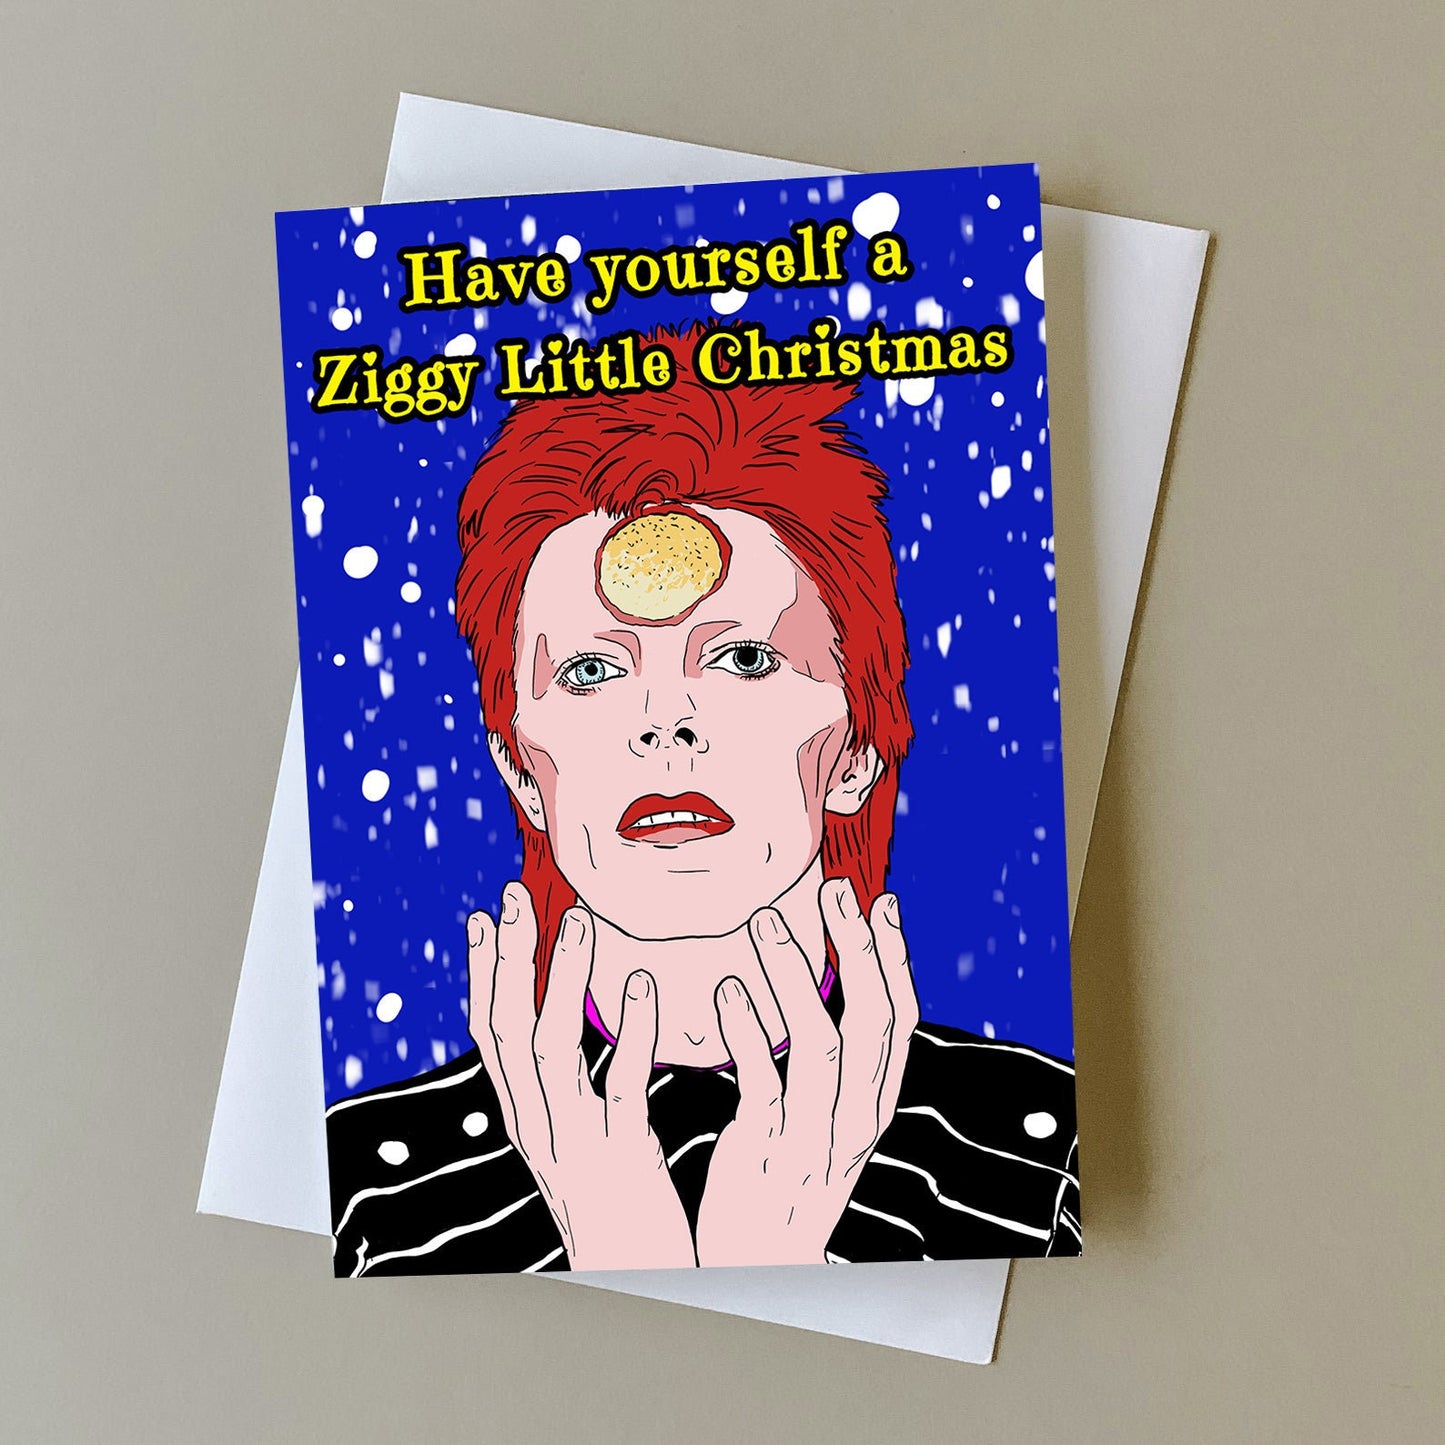 David Bowie Christmas card, gift for David Bowie fan, greeting card for music fans, music Christmas gift, Ziggy Stardust Christmas card